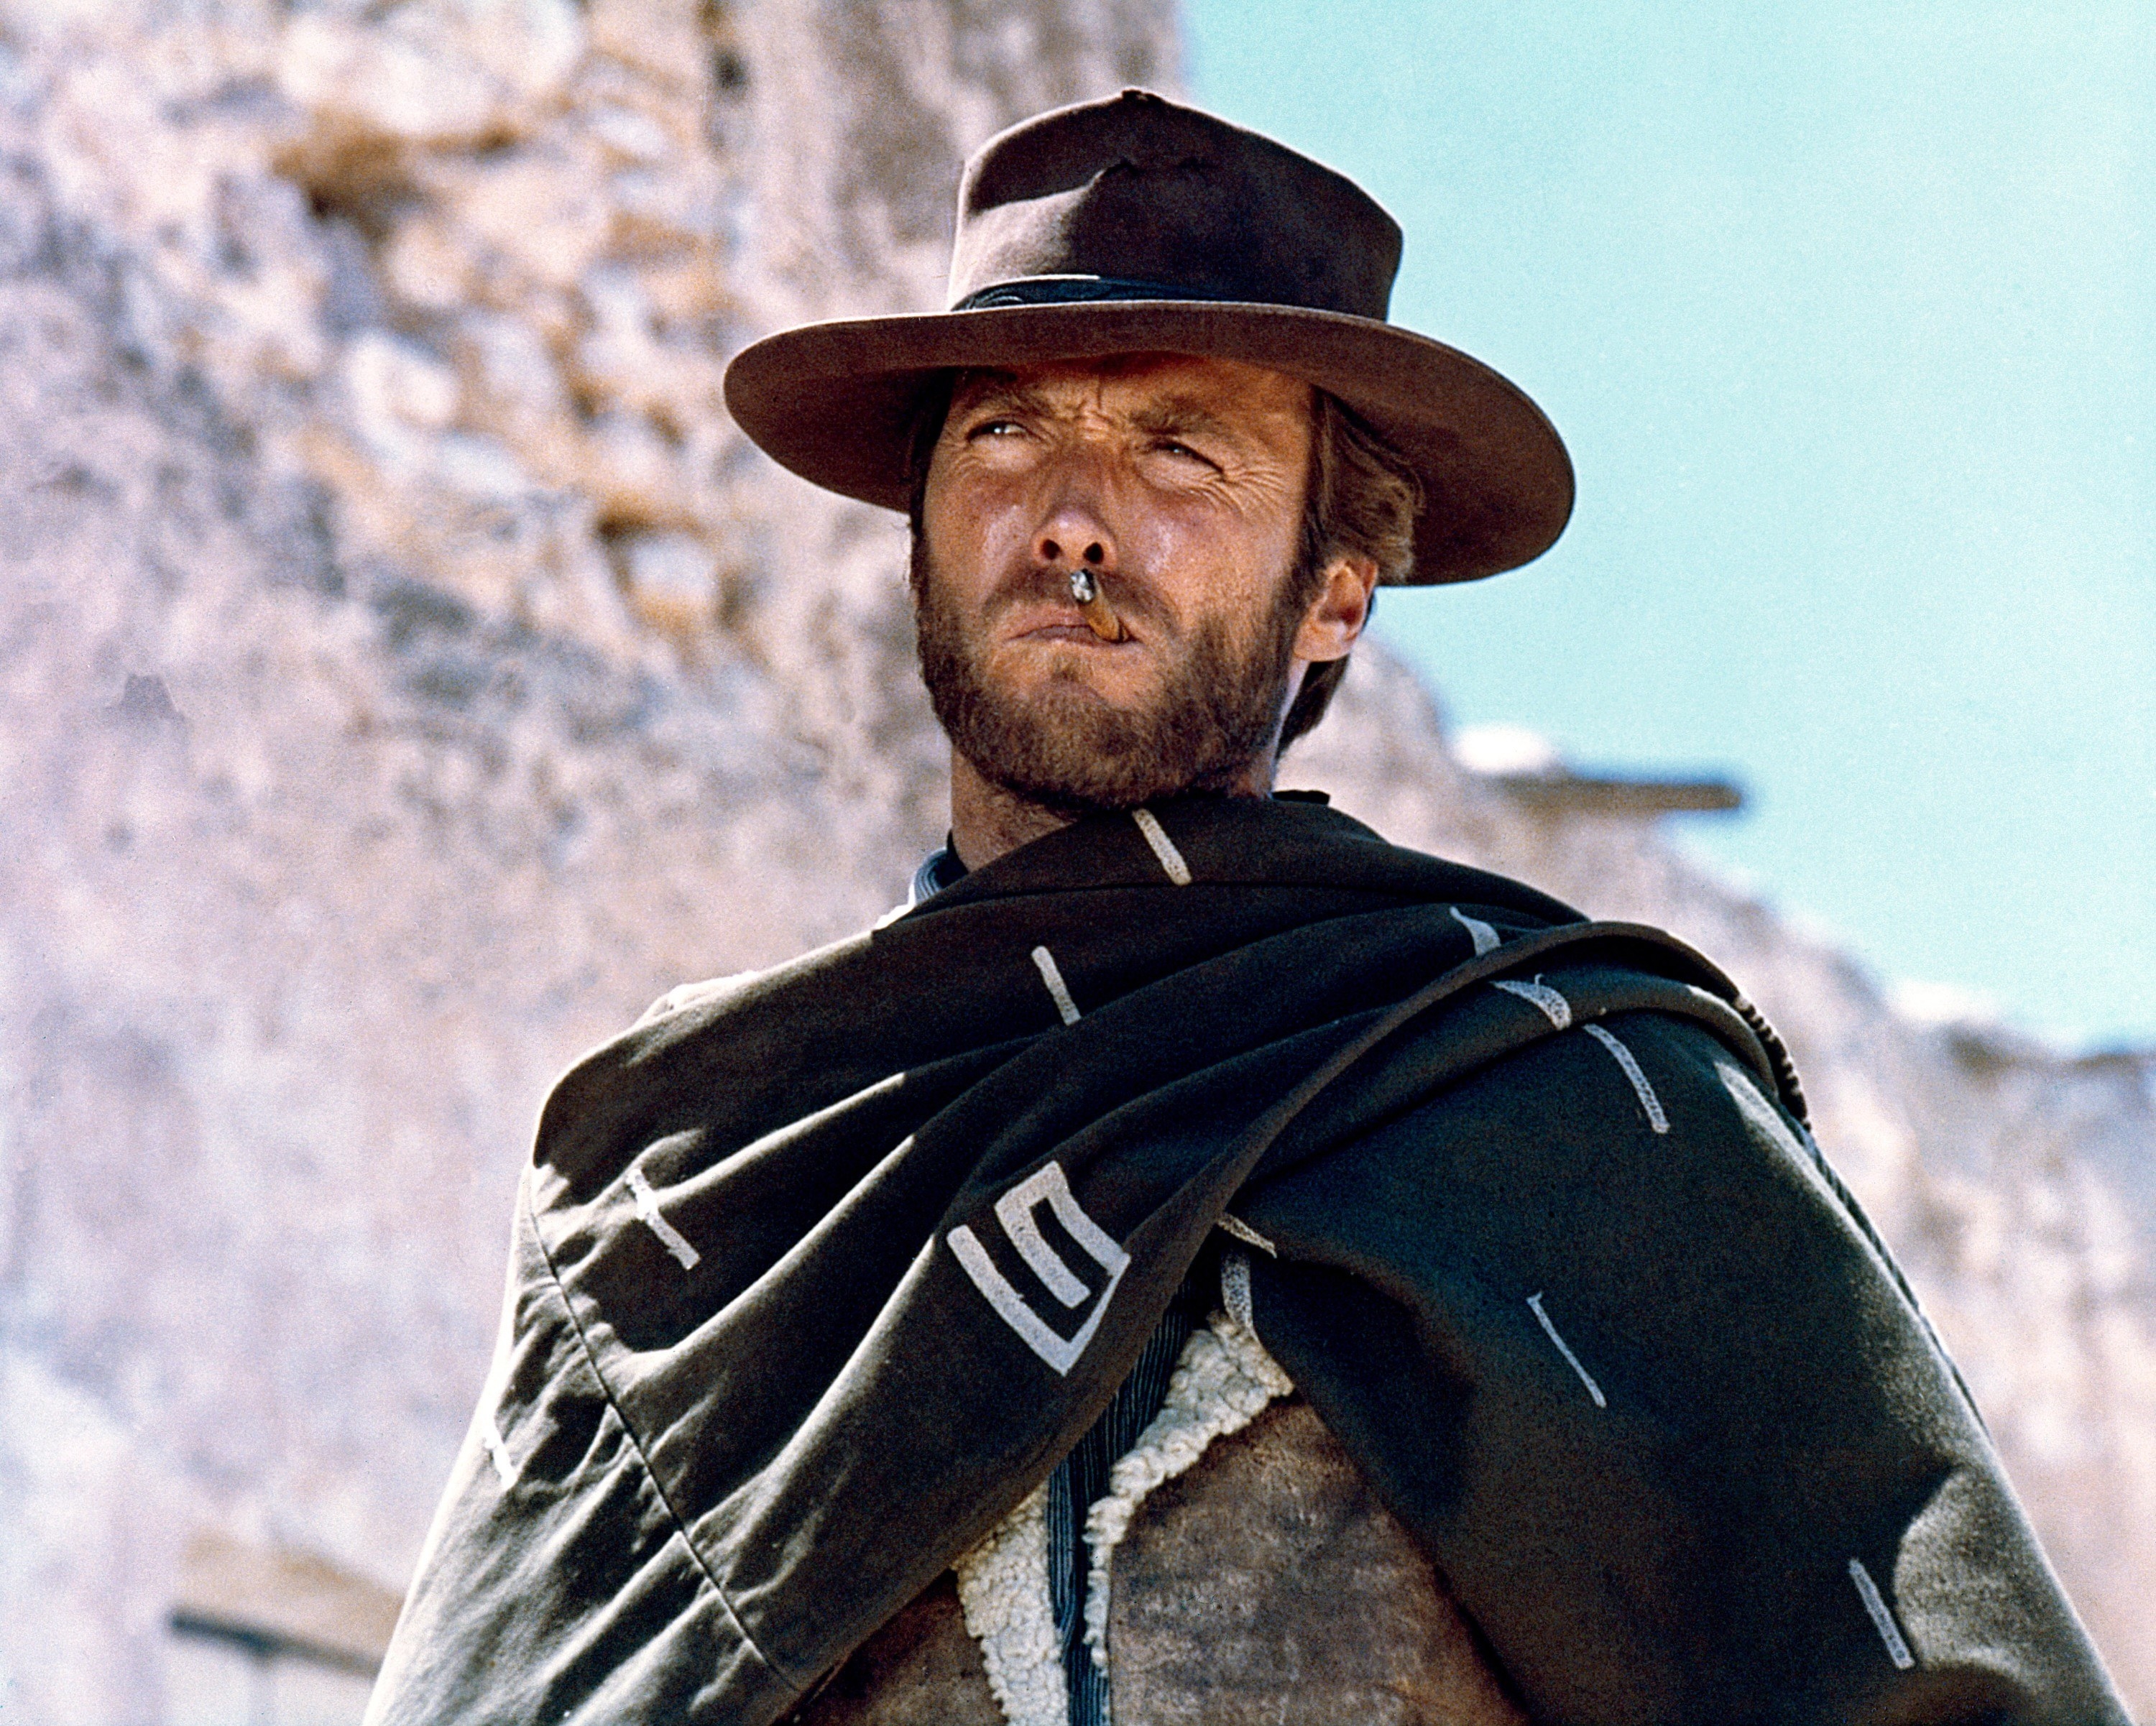 Clint Eastwood in A Fistful of Dollars